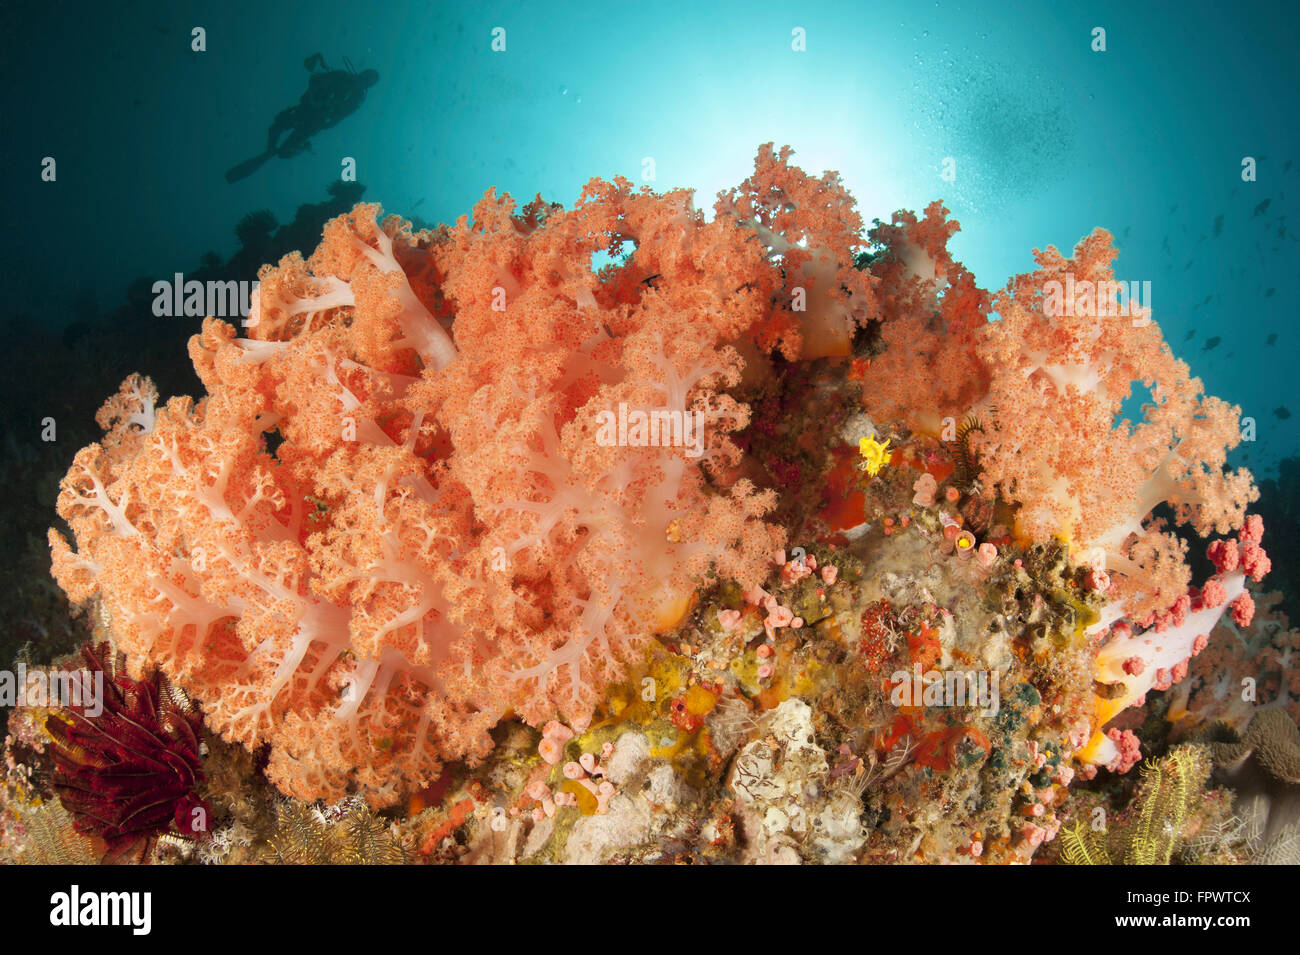 Diver looks on at sponges, pink soft corals and crinoids in a colorful Komodo seascape, Komodo National Park, Indonesia. Stock Photo